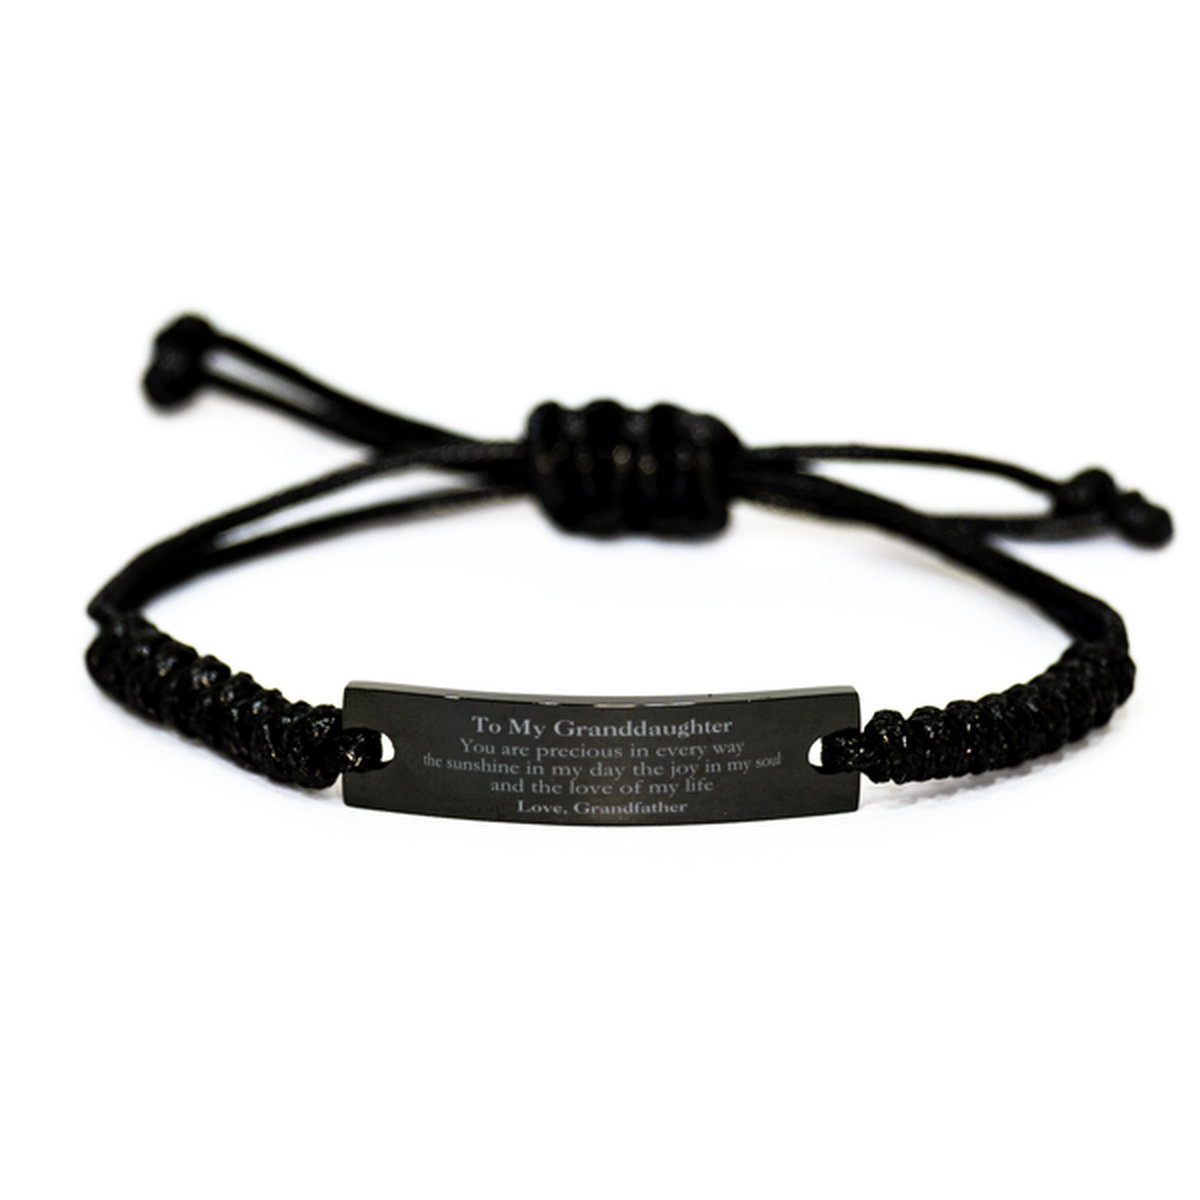 Graduation Gifts for Granddaughter Black Rope Bracelet Present from Grandfather, Christmas Granddaughter Birthday Gifts Granddaughter You are precious in every way the sunshine in my day. Love, Grandfather